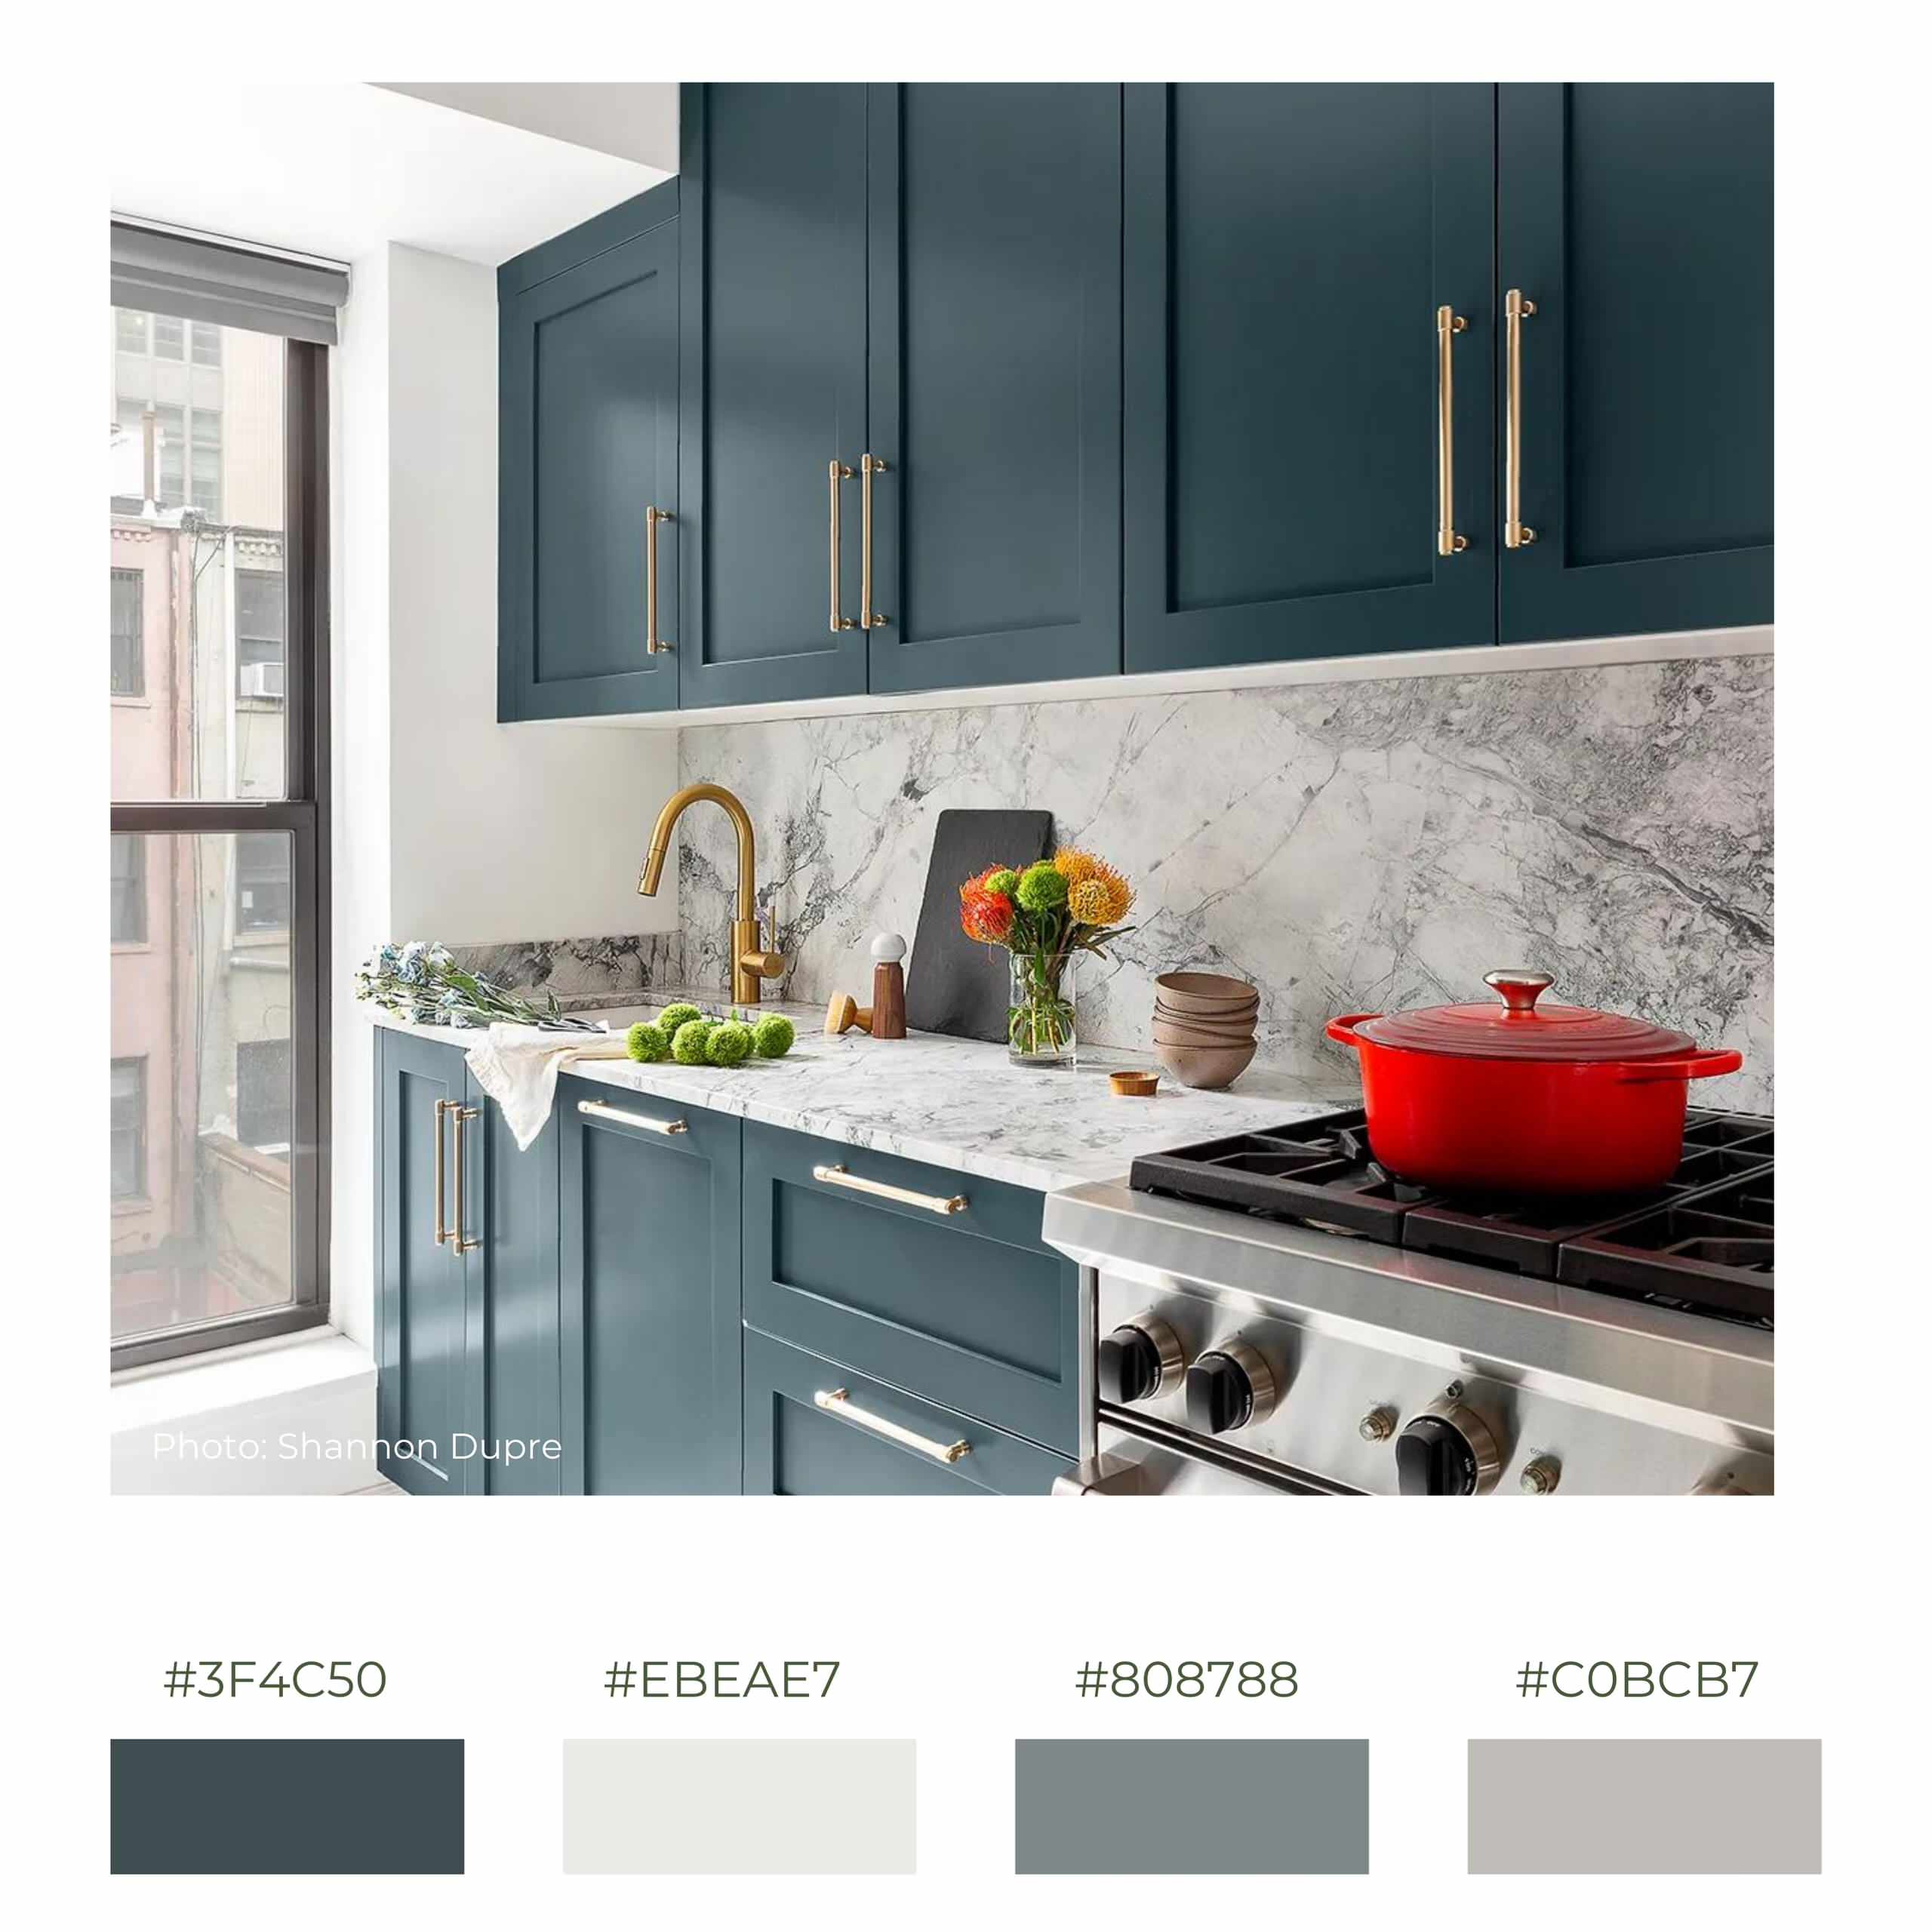 Introducing navy blue as the new classic hue for your home remodeling color palettes.